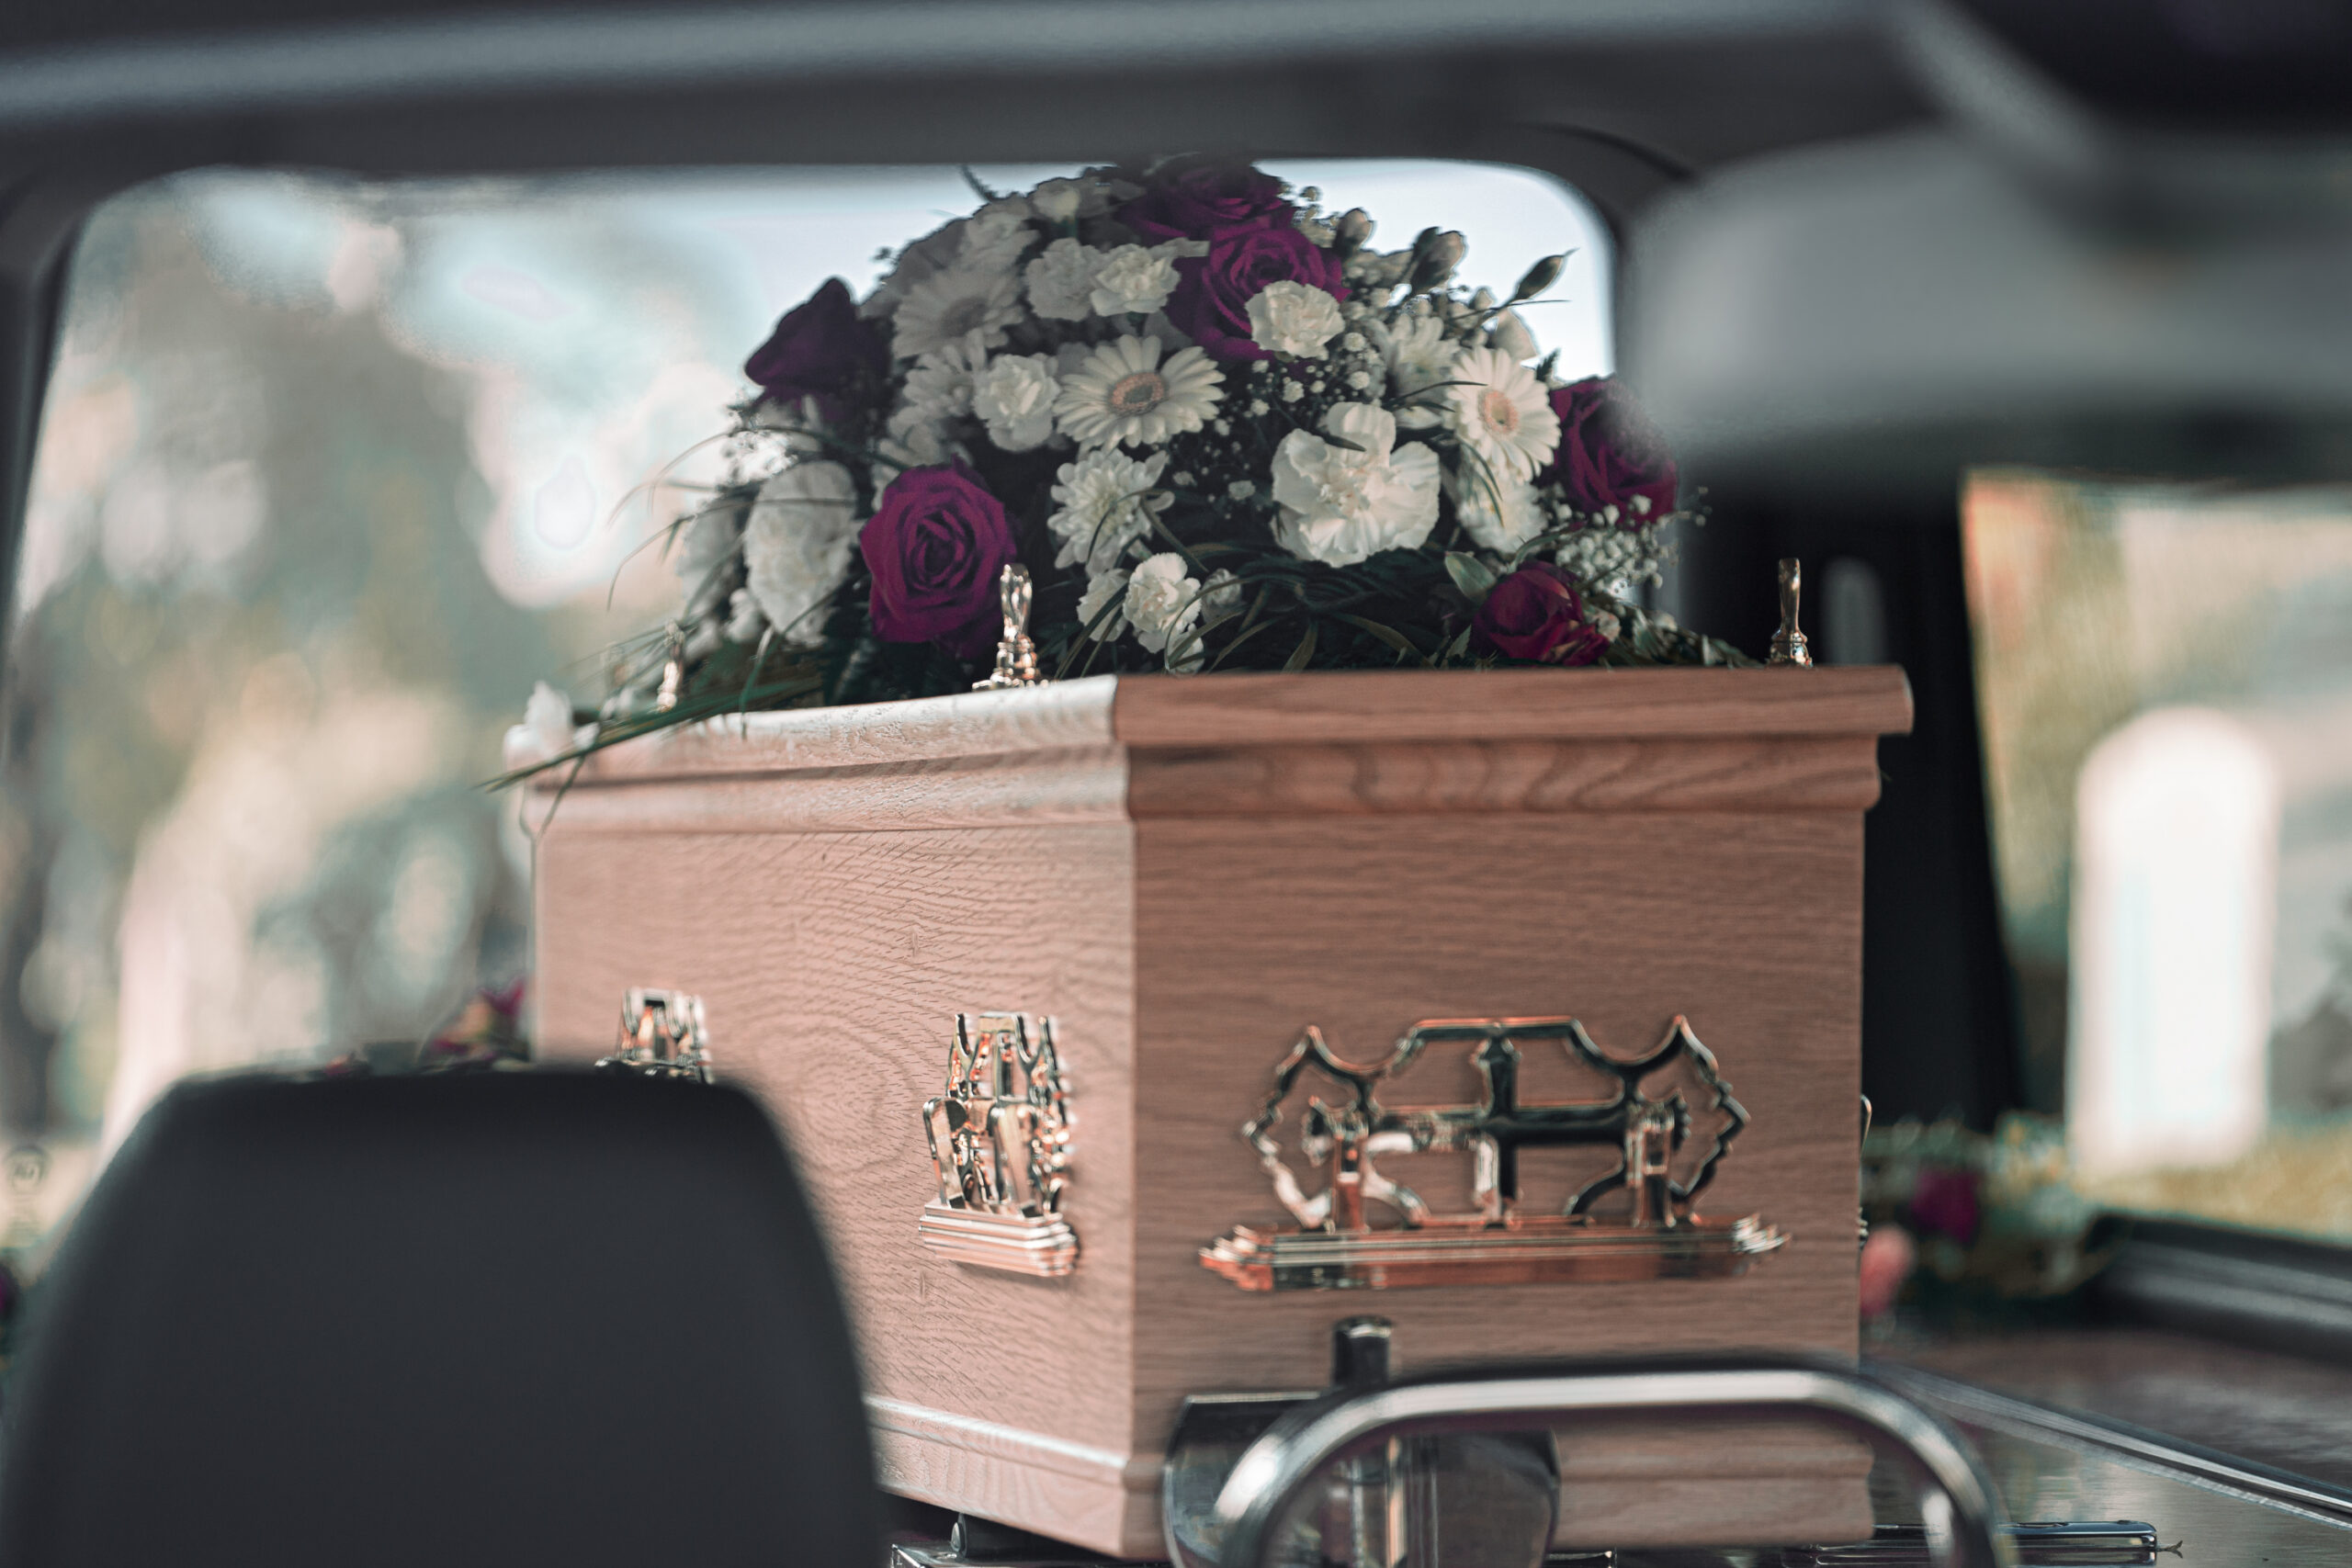 Coffin in a hearse with flowers to represent funeral costs.